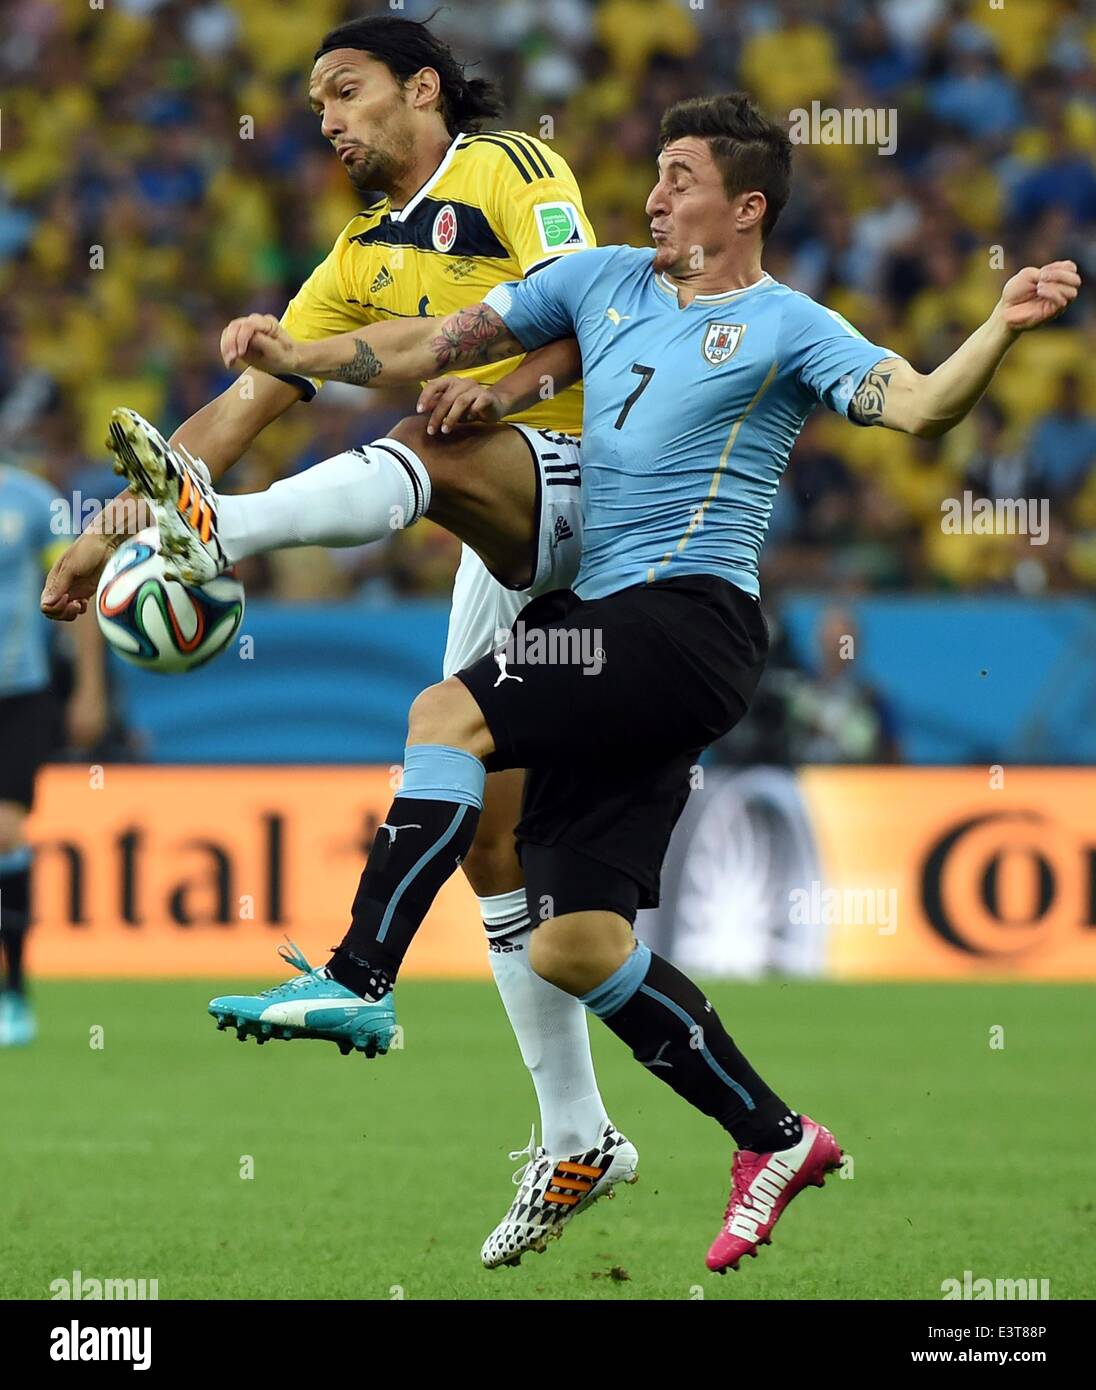 Rio De Janeiro, Brazil. 28th June, 2014. Colombia's Abel Aguilar vies with Uruguay's Cristian Rodriguez during a Round of 16 match between Colombia and Uruguay of 2014 FIFA World Cup at the Estadio do Maracana Stadium in Rio de Janeiro, Brazil, on June 28, 2014. Credit:  Wang Yuguo/Xinhua/Alamy Live News Stock Photo